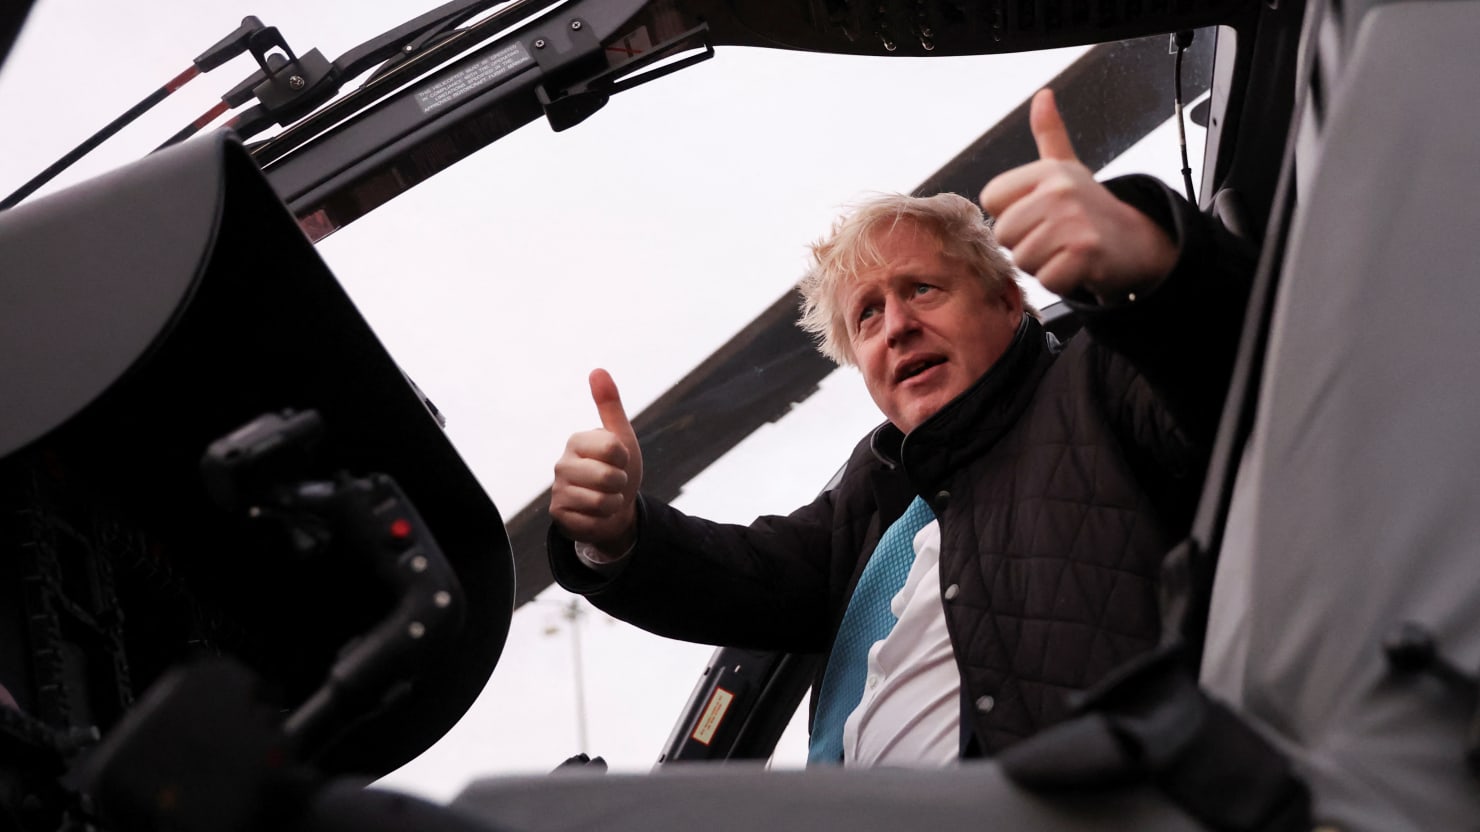 Scotland Yard Accused of Massive ‘Cover Up’ to Save Boris Johnson’s Job – The Daily Beast